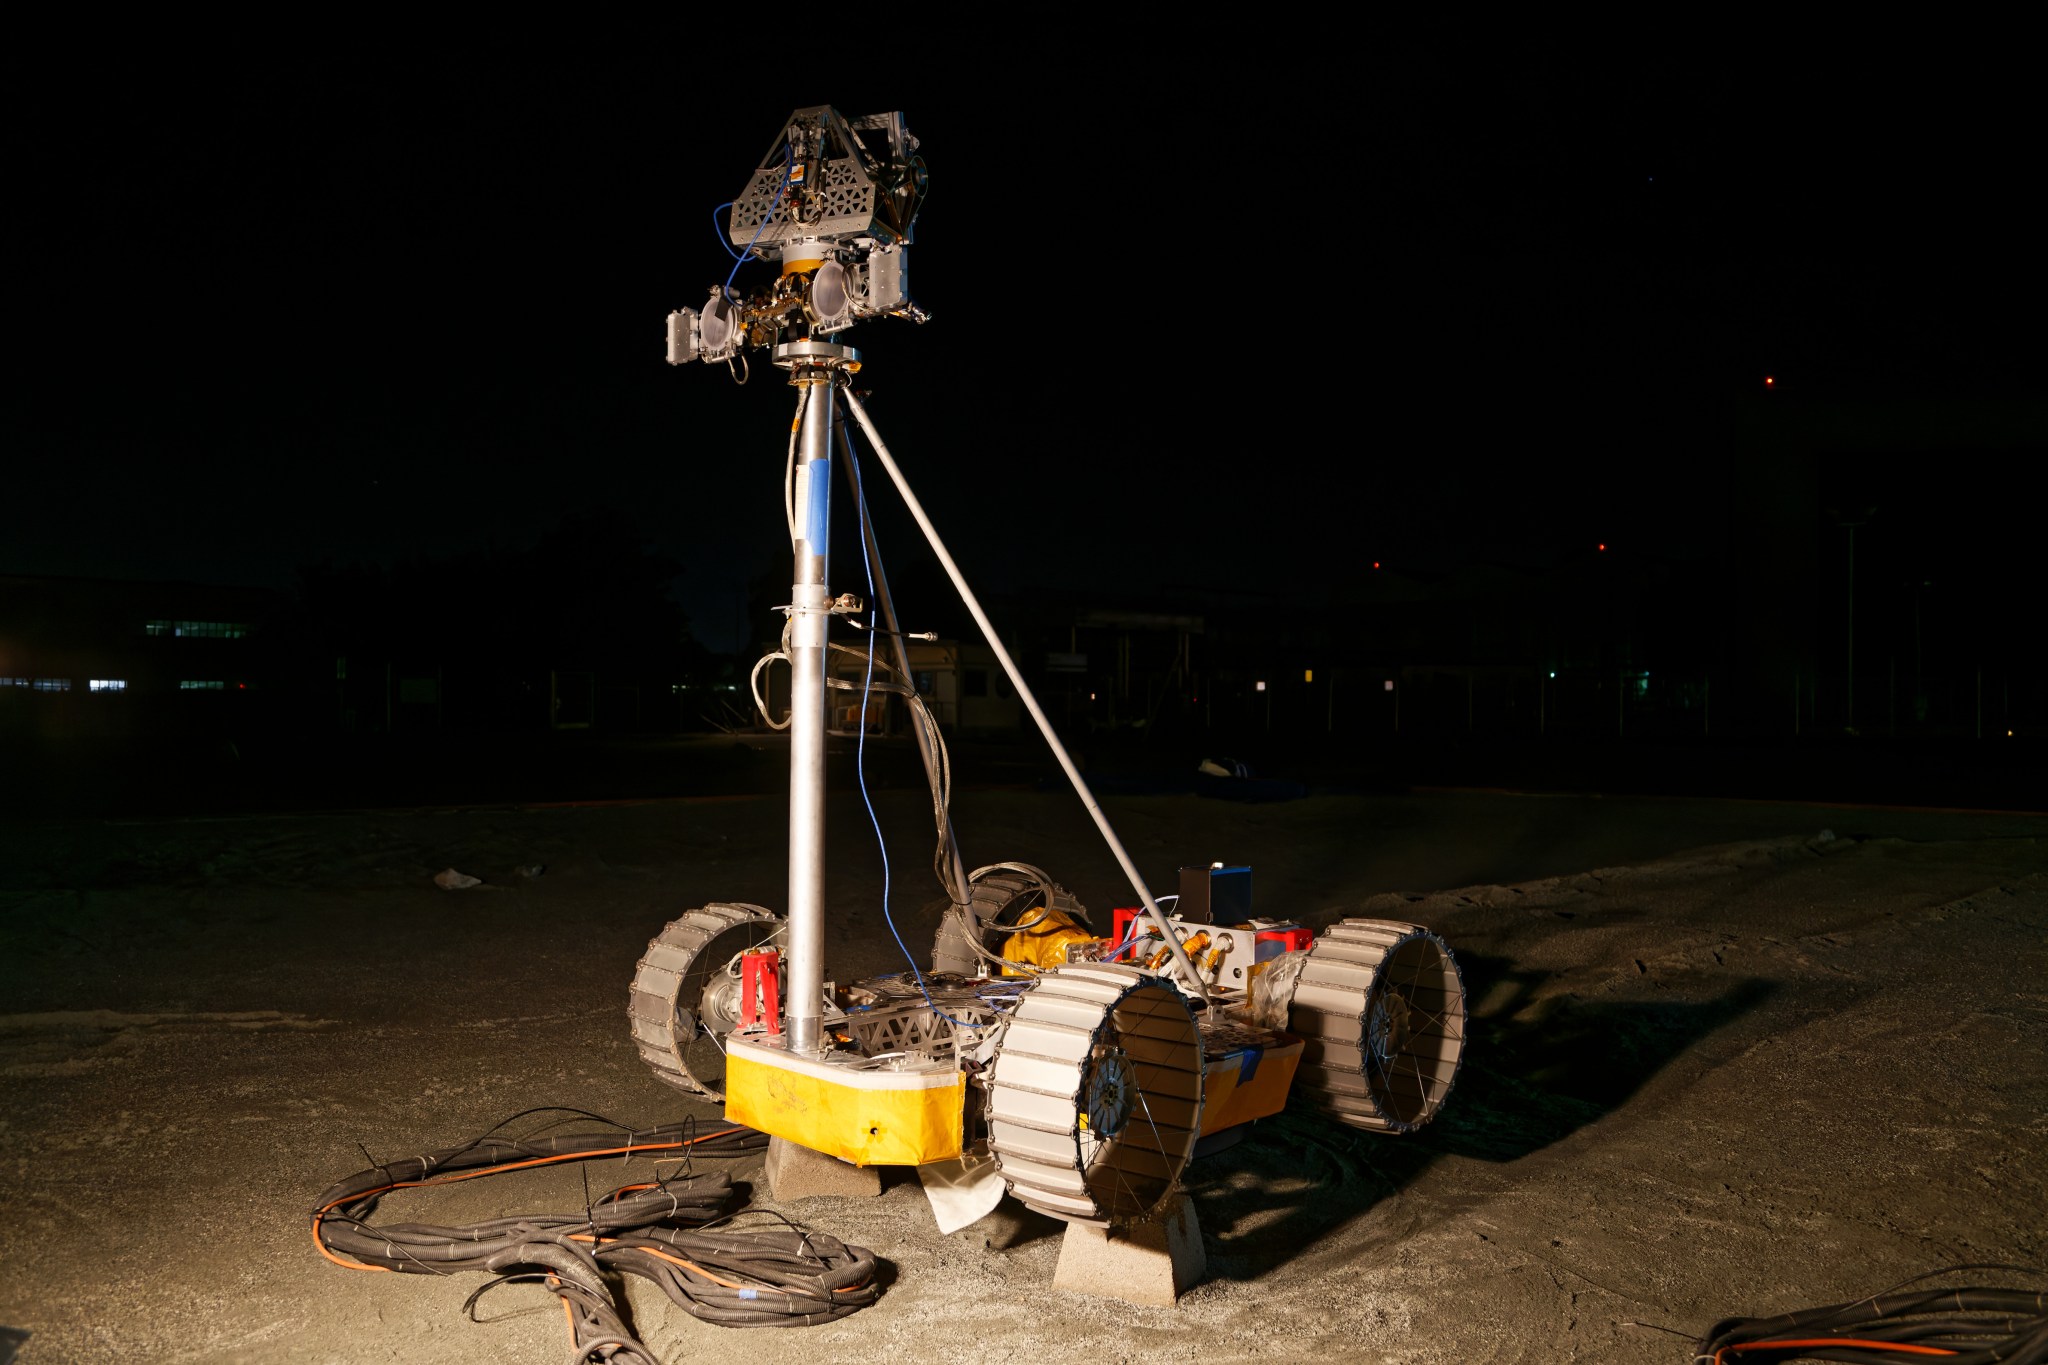 The latest prototype of the VIPER (Volatiles Investigating Polar Exploration Rover), during a night time test in the Roverscape at NASA's Ames Research Center